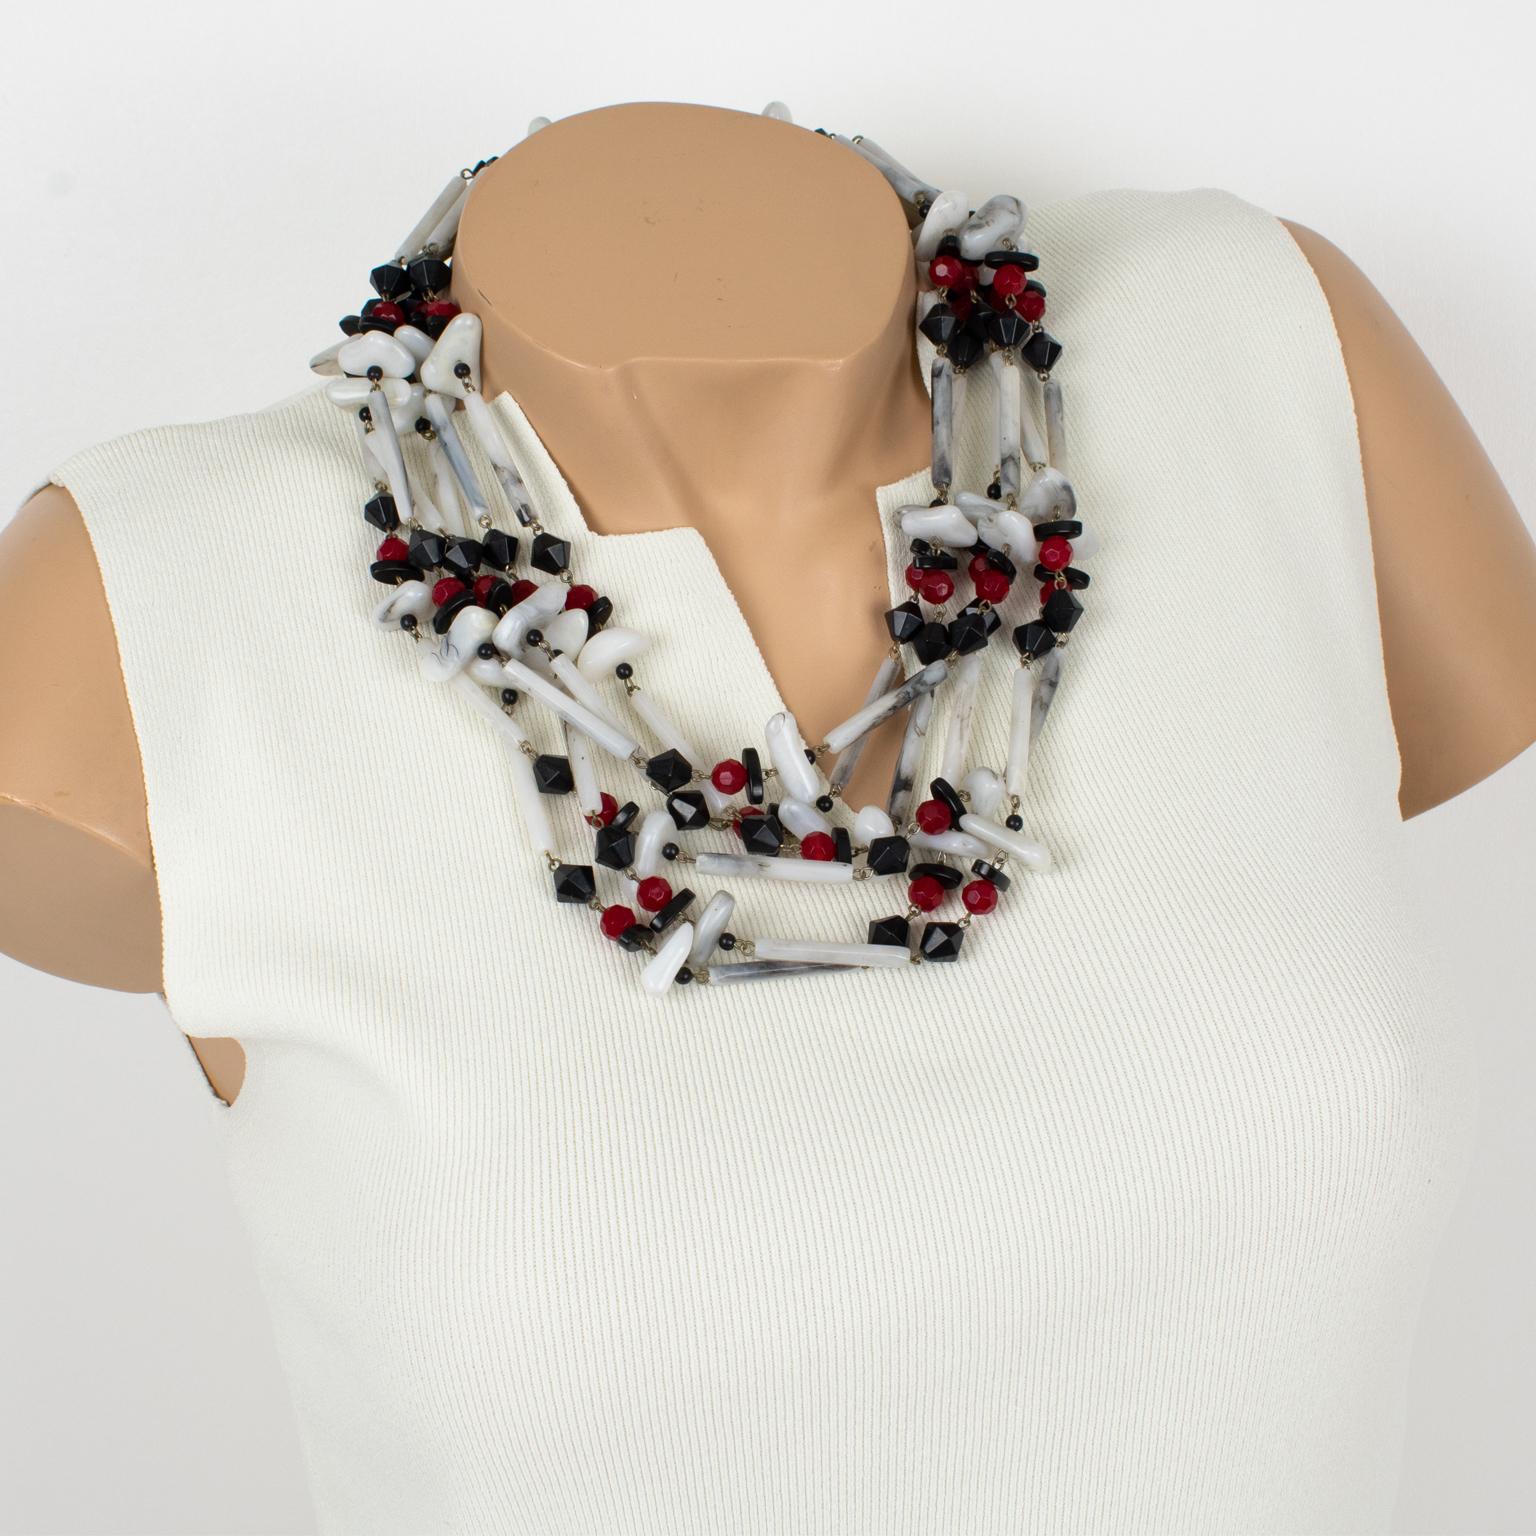 This lovely Angela Caputi, made in Italy resin choker beaded necklace features an oversized multi-strand design with assorted pebble and long stick beads in red, black, and white colors. The white-colored resin beads have a faux Carrara marble